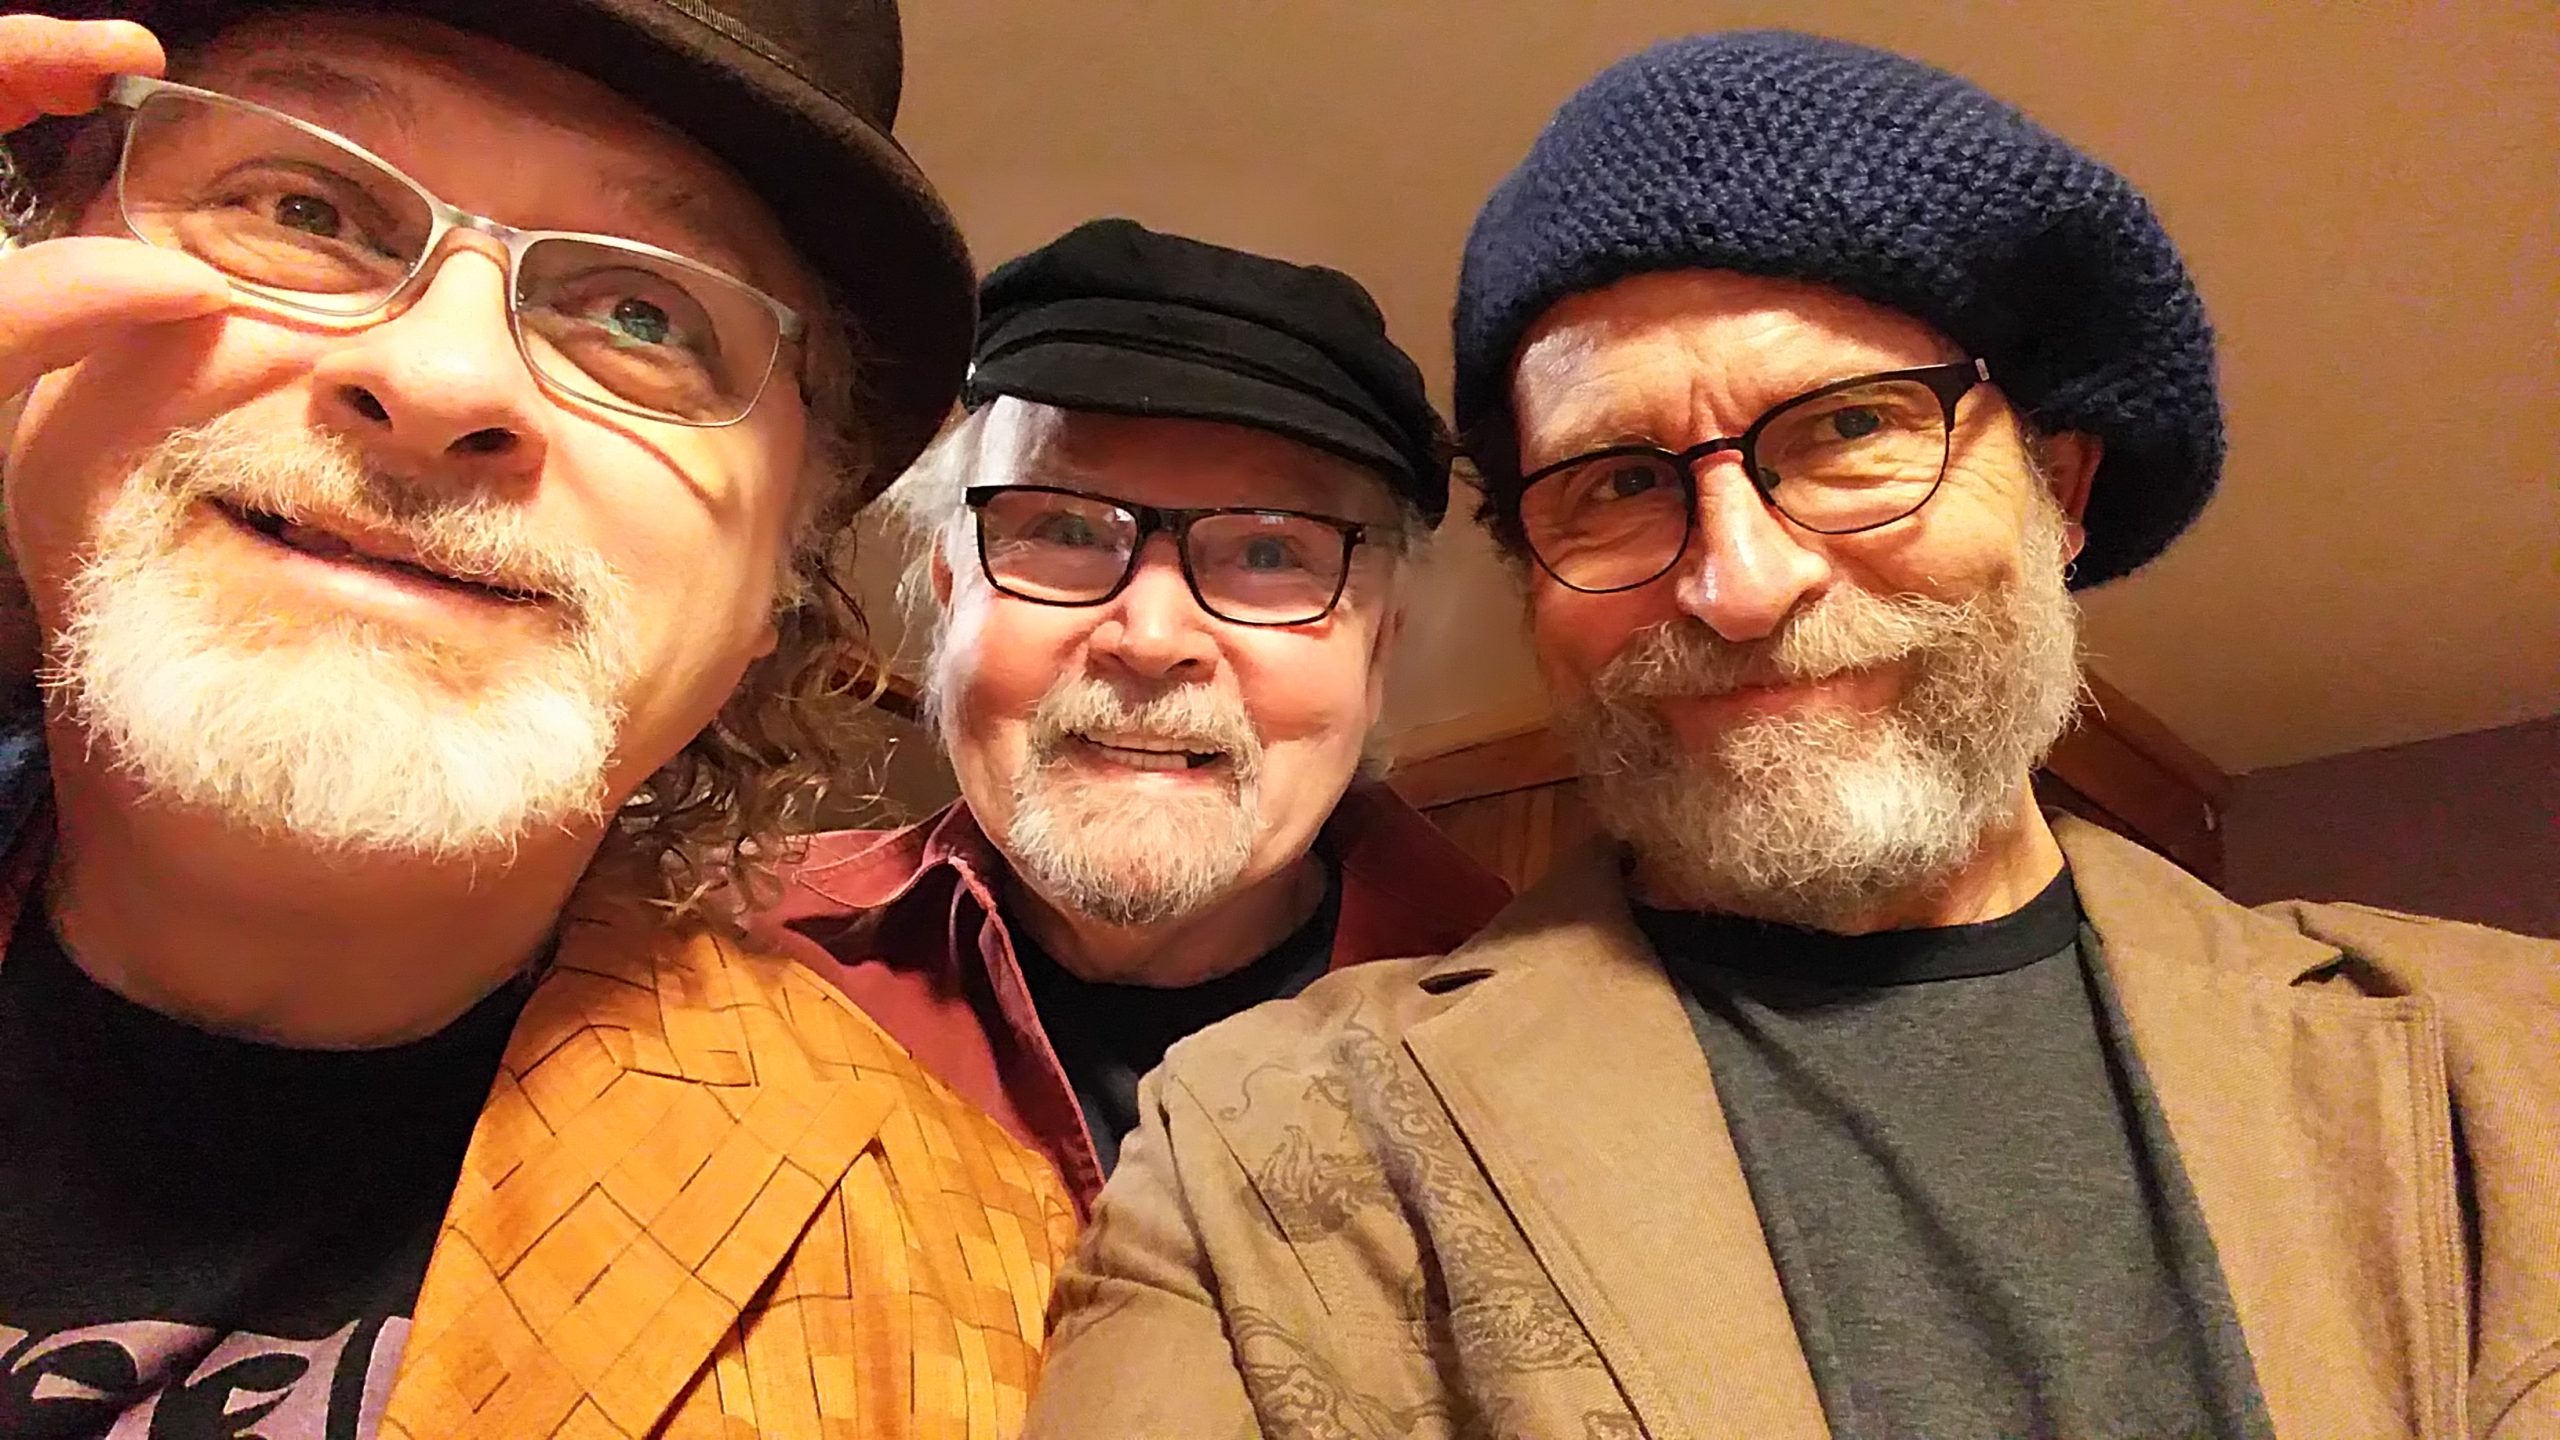 Tom Paxton and the Don Juans